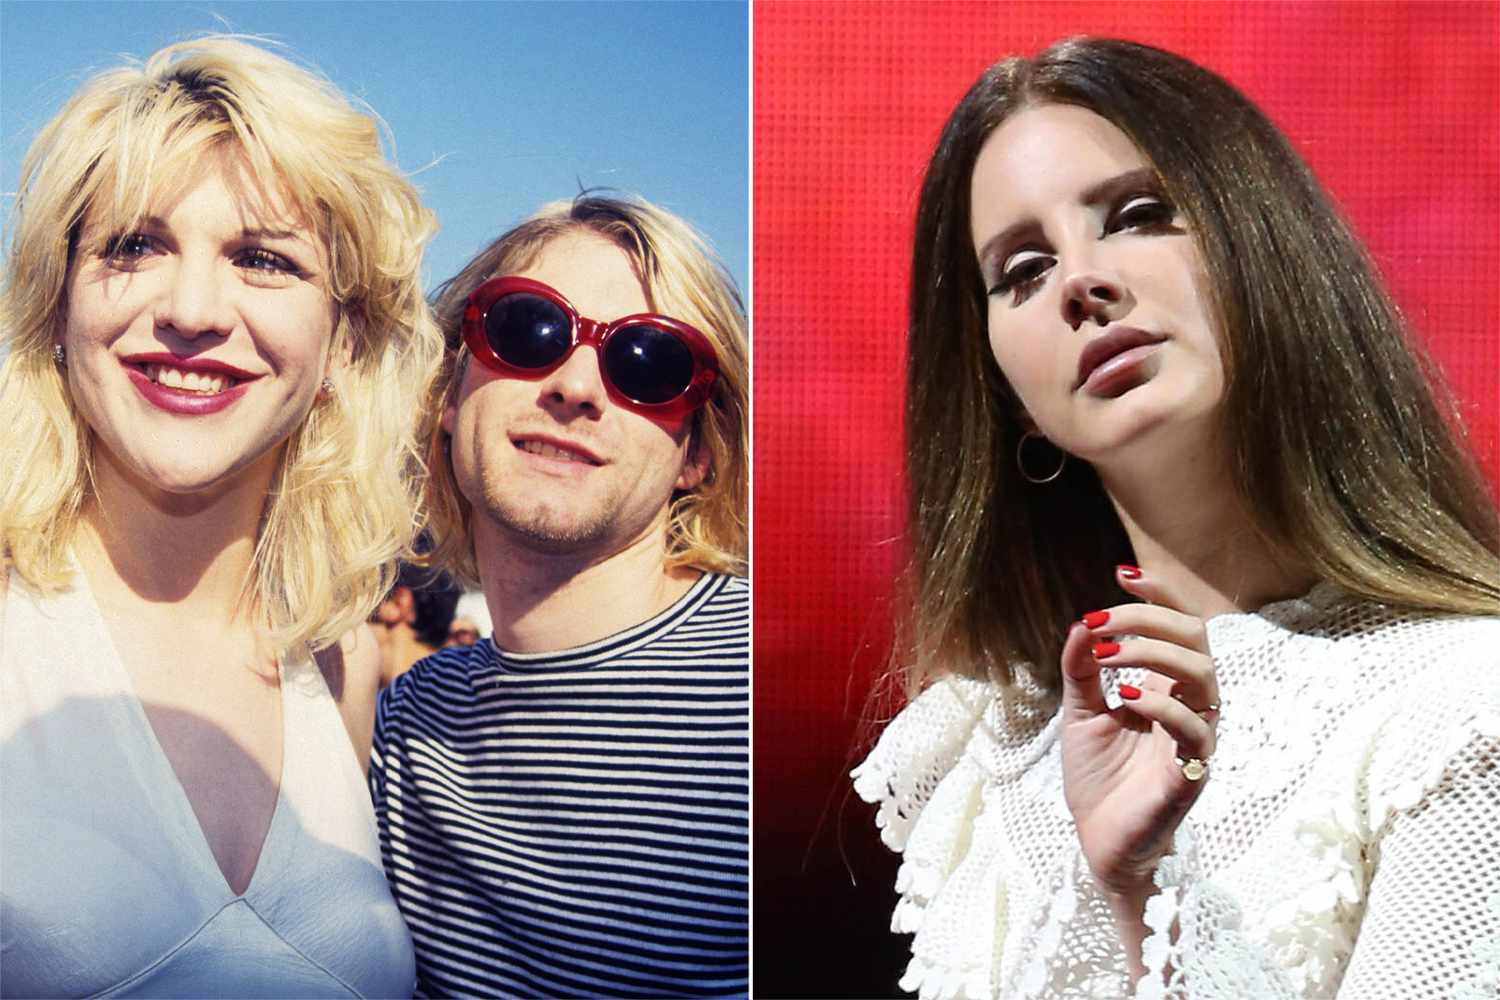 Courtney Love calls Kurt Cobain and Lana Del Rey ‘only 2 true musical geniuses’ she’s ever known